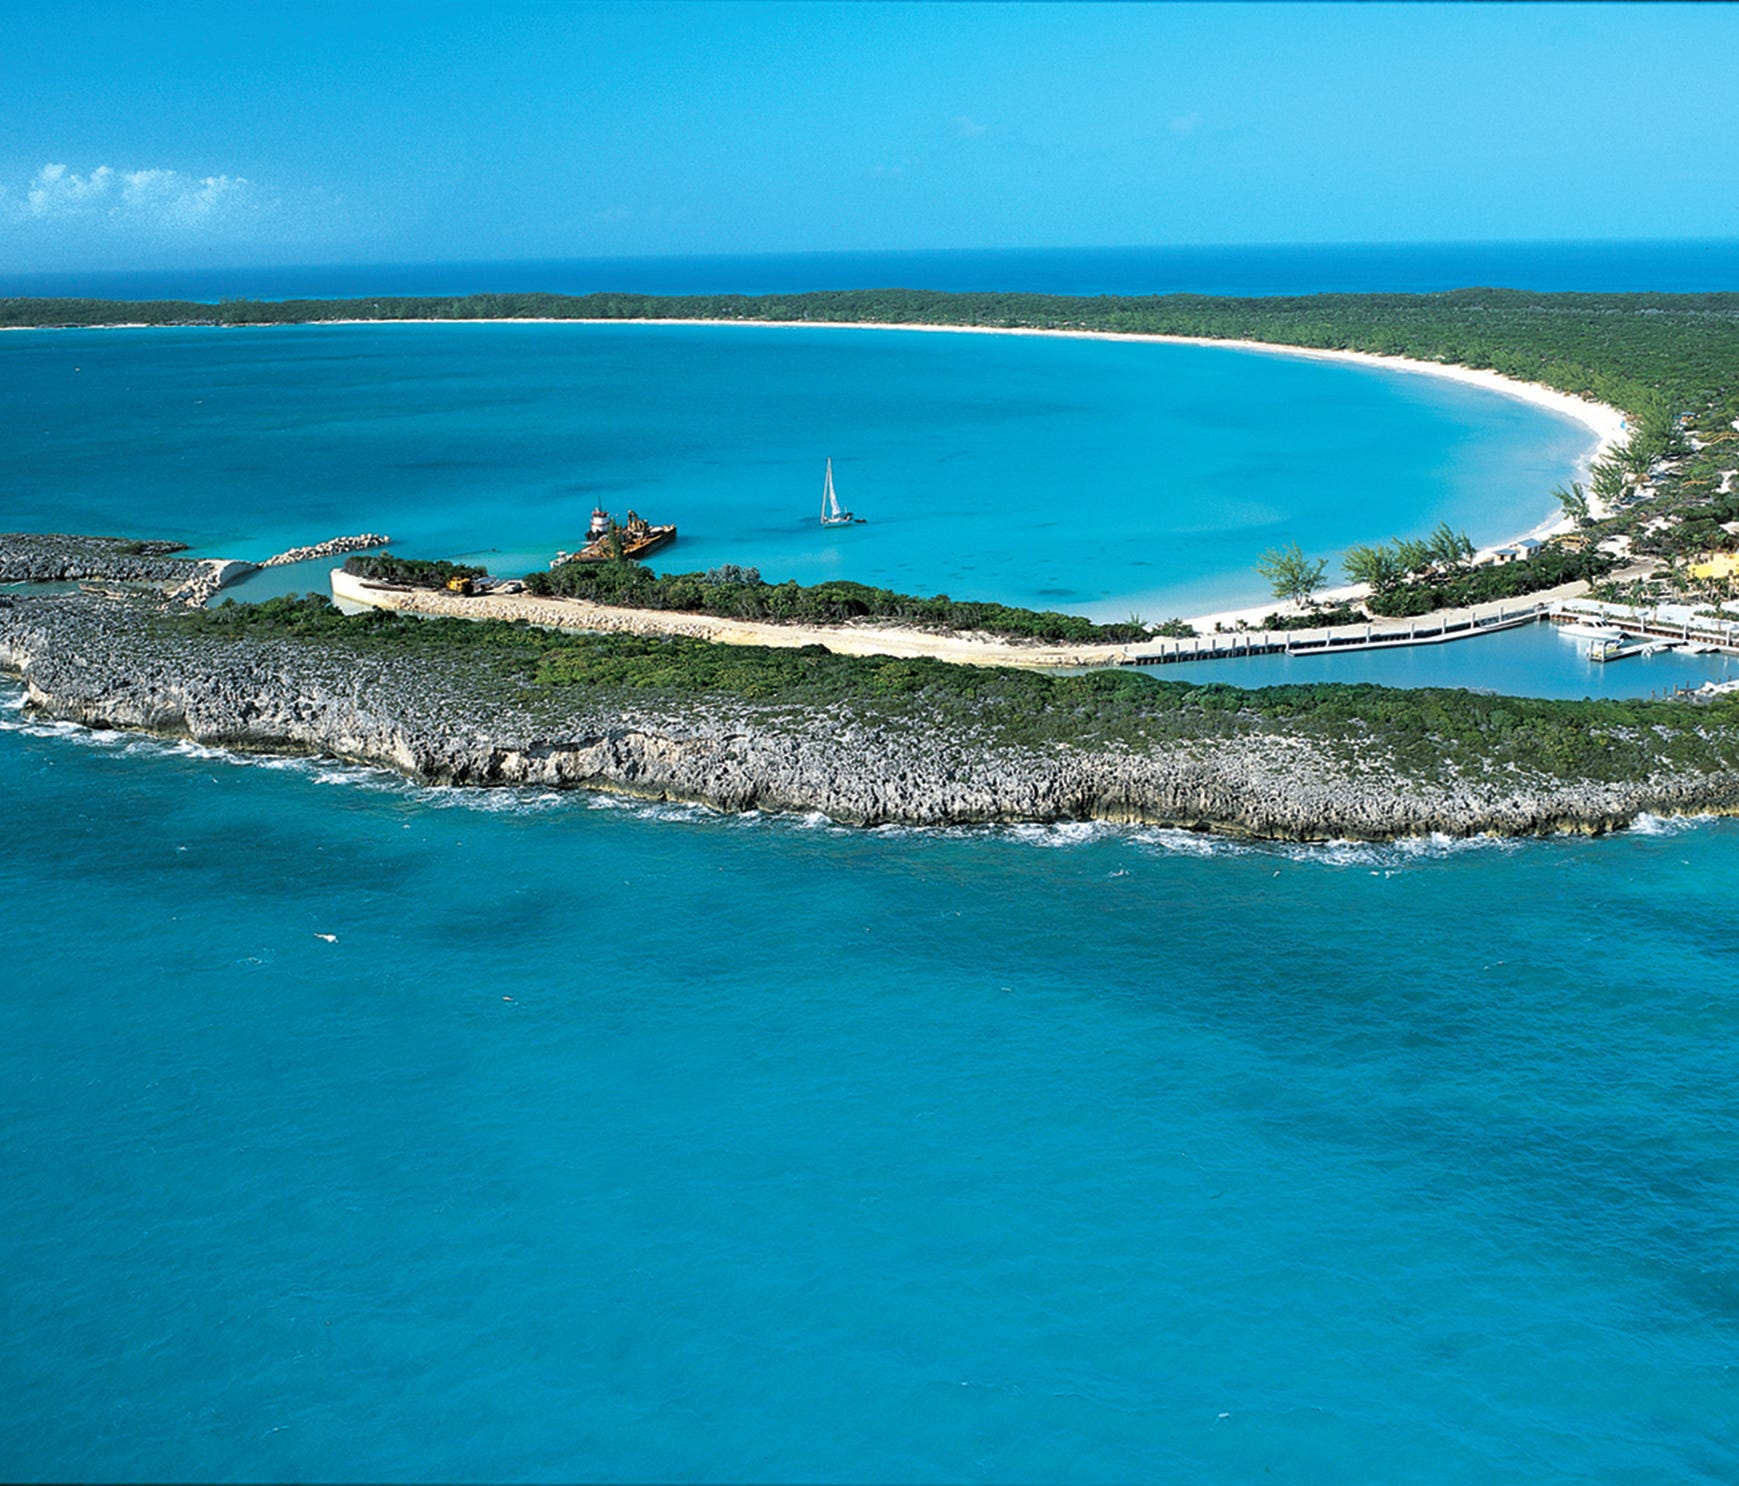 An aerial view of Half Moon Cay, Holland America's private island in the Bahamas.